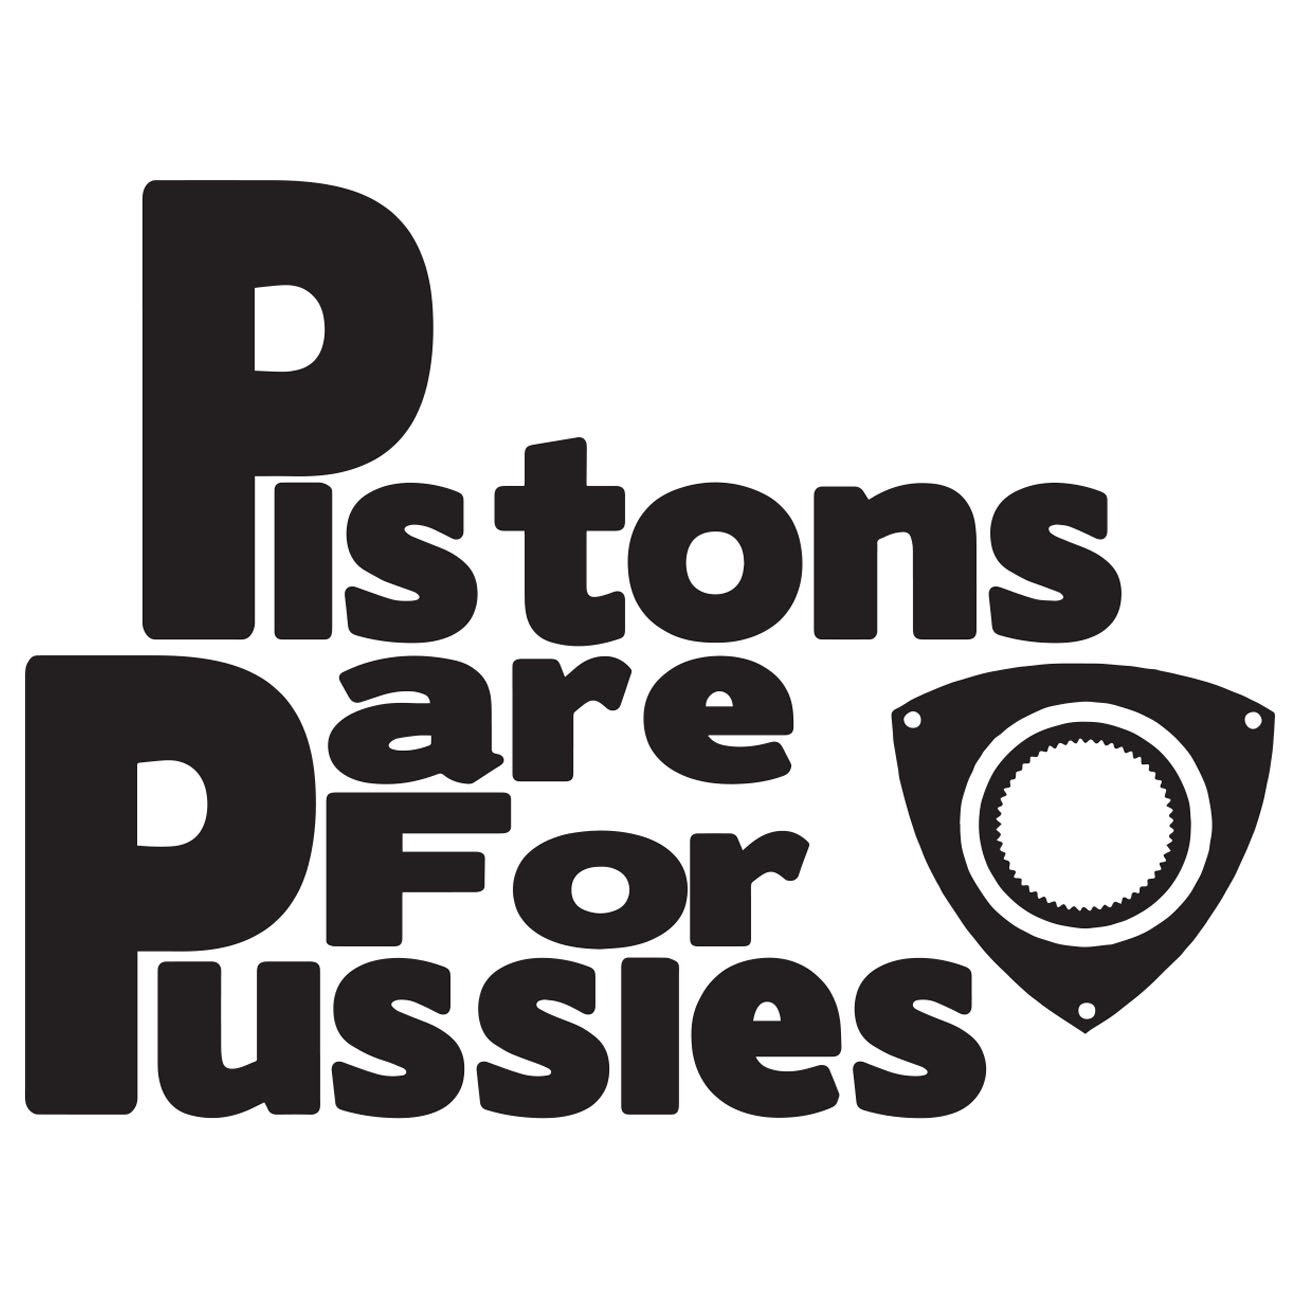 Pistons are for pussies